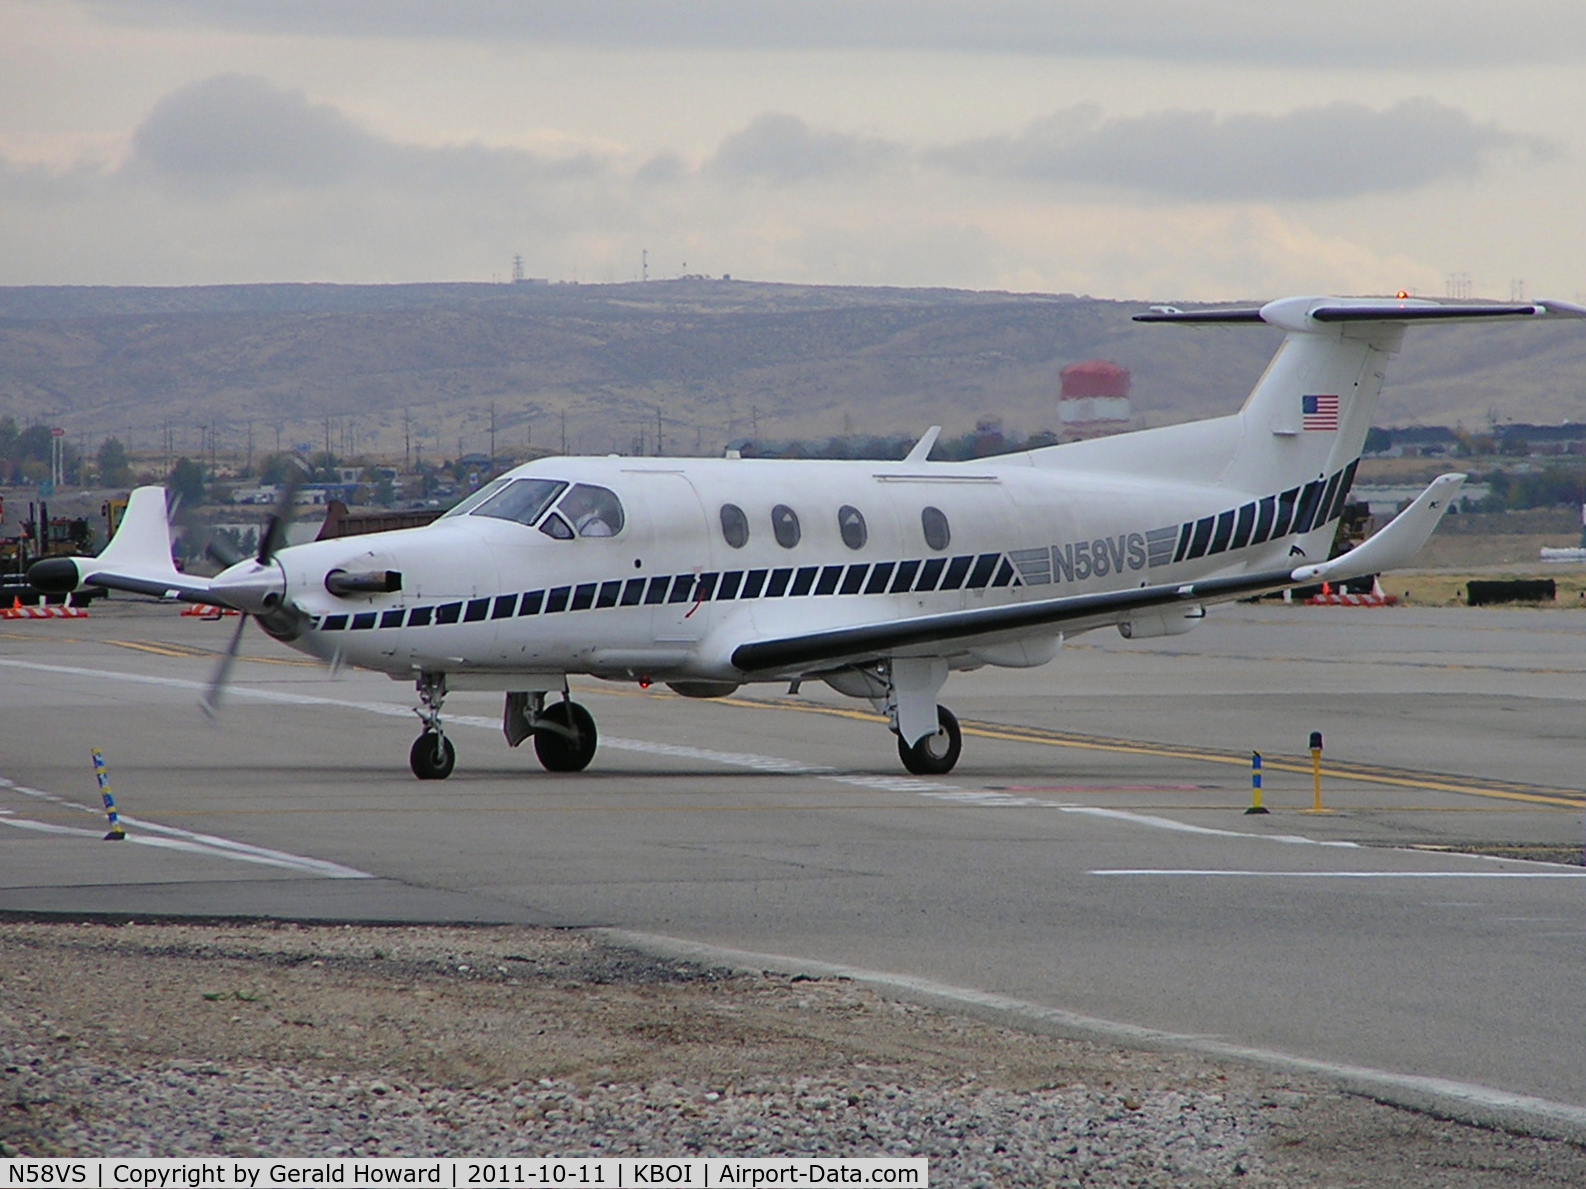 N58VS, 2000 Pilatus PC-12/45 C/N 341, Seaport Airlines. Aircraft damaged in 2014 during gear up landing.